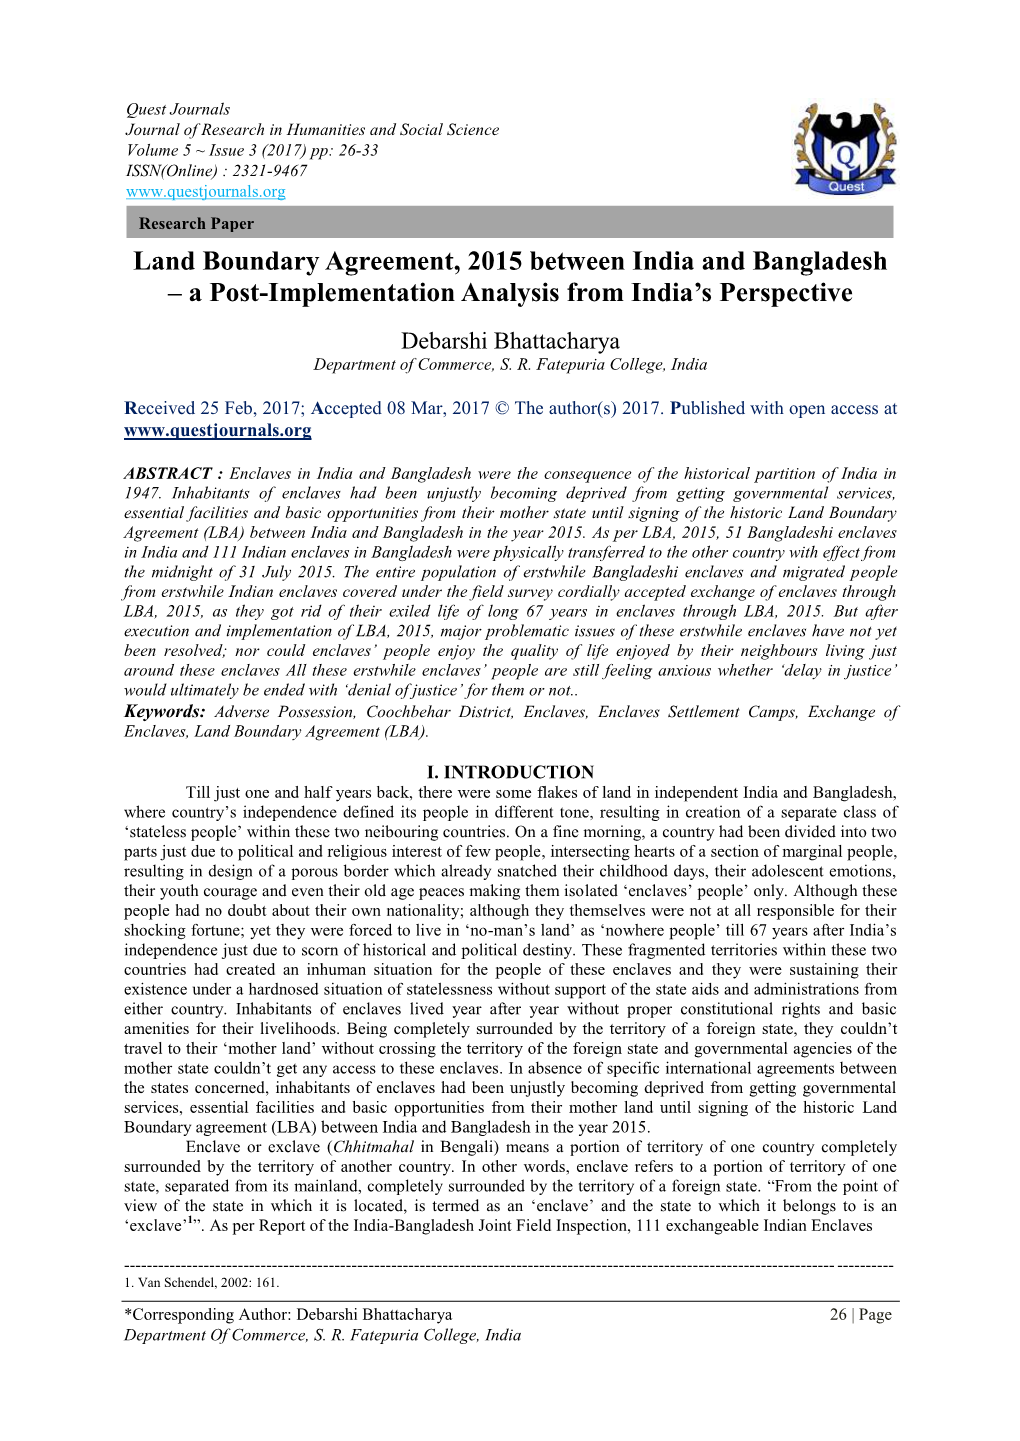 Land Boundary Agreement, 2015 Between India and Bangladesh – a Post-Implementation Analysis from India’S Perspective